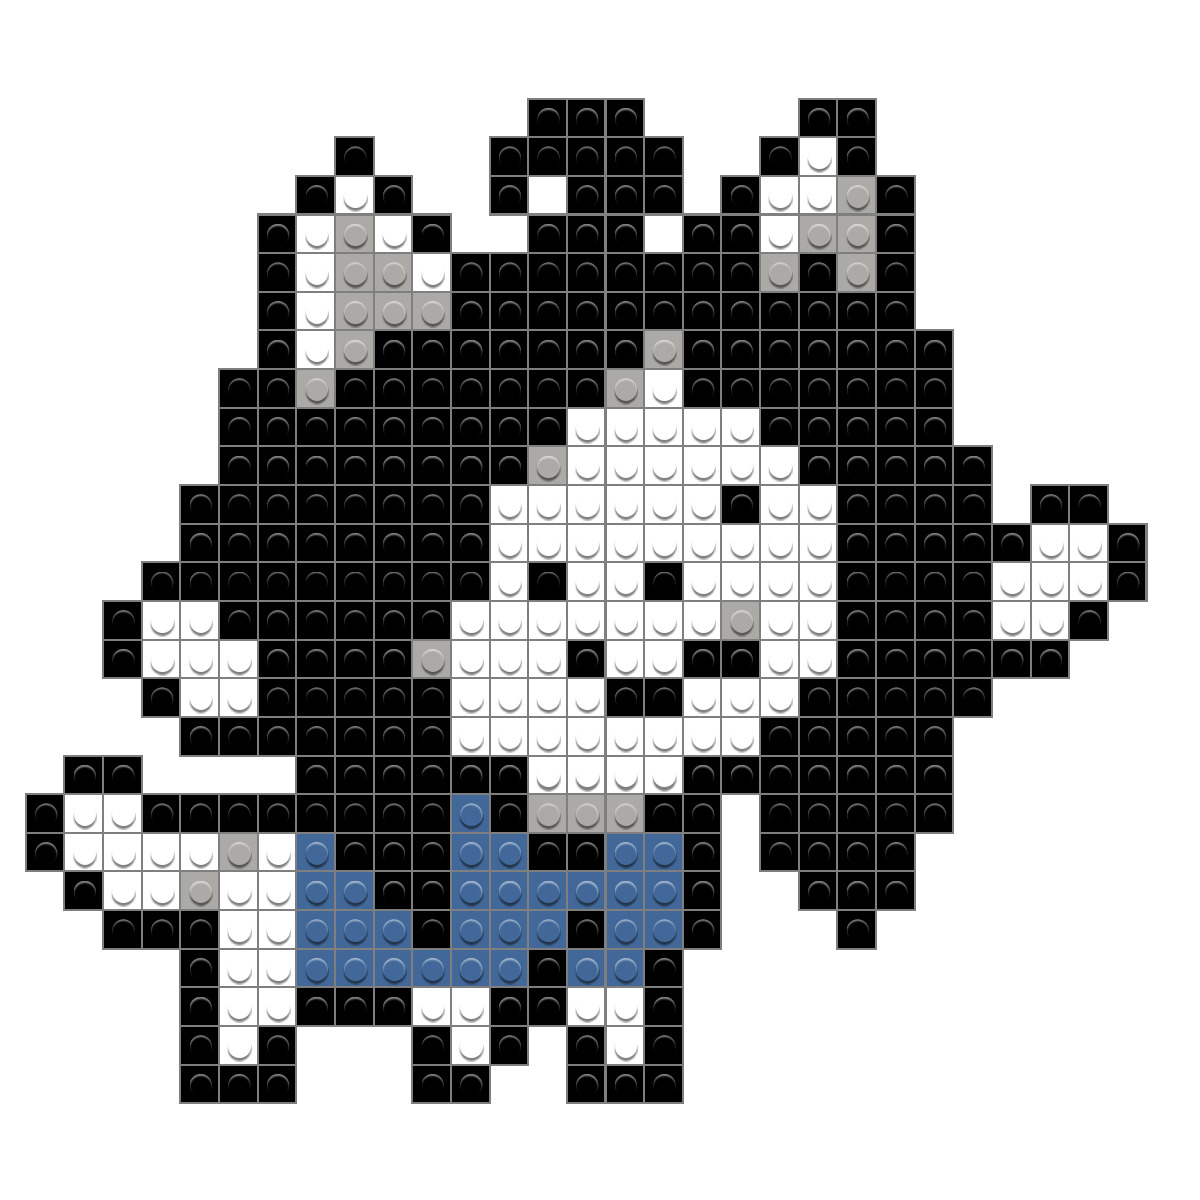 diane heil recommends Images Of Temmie From Undertale